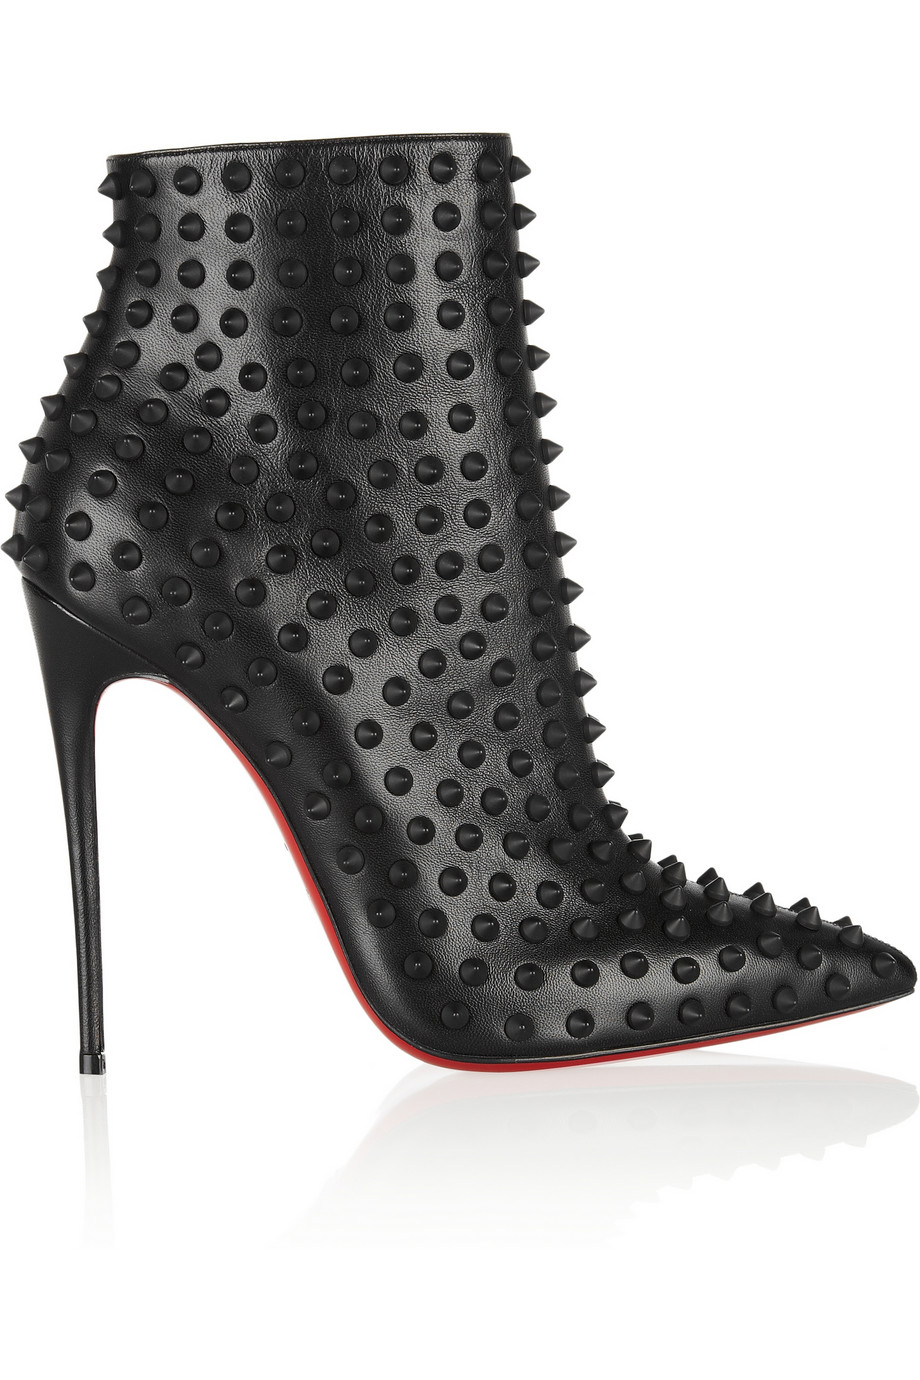 Christian Louboutin Snakilta 120 Spiked Leather Ankle Boots in Black | Lyst